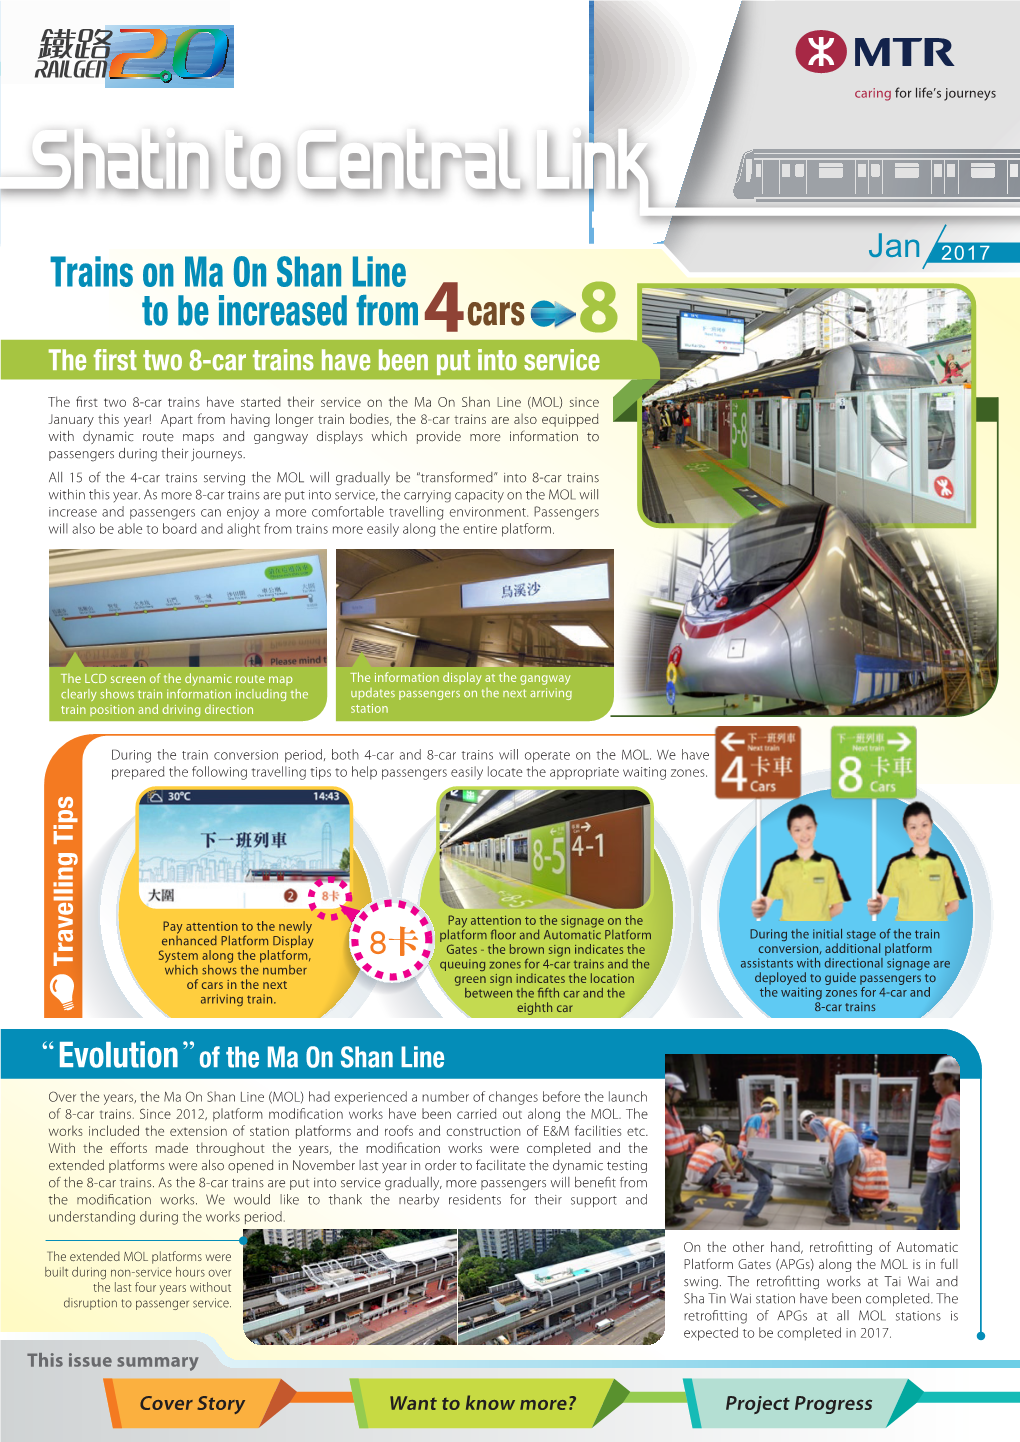 Shatin Section Section Jan 2017 Trains on Ma on Shan Line to Be Increased From4cars 8 the ﬁrst Two 8-Car Trains Have Been Put Into Service